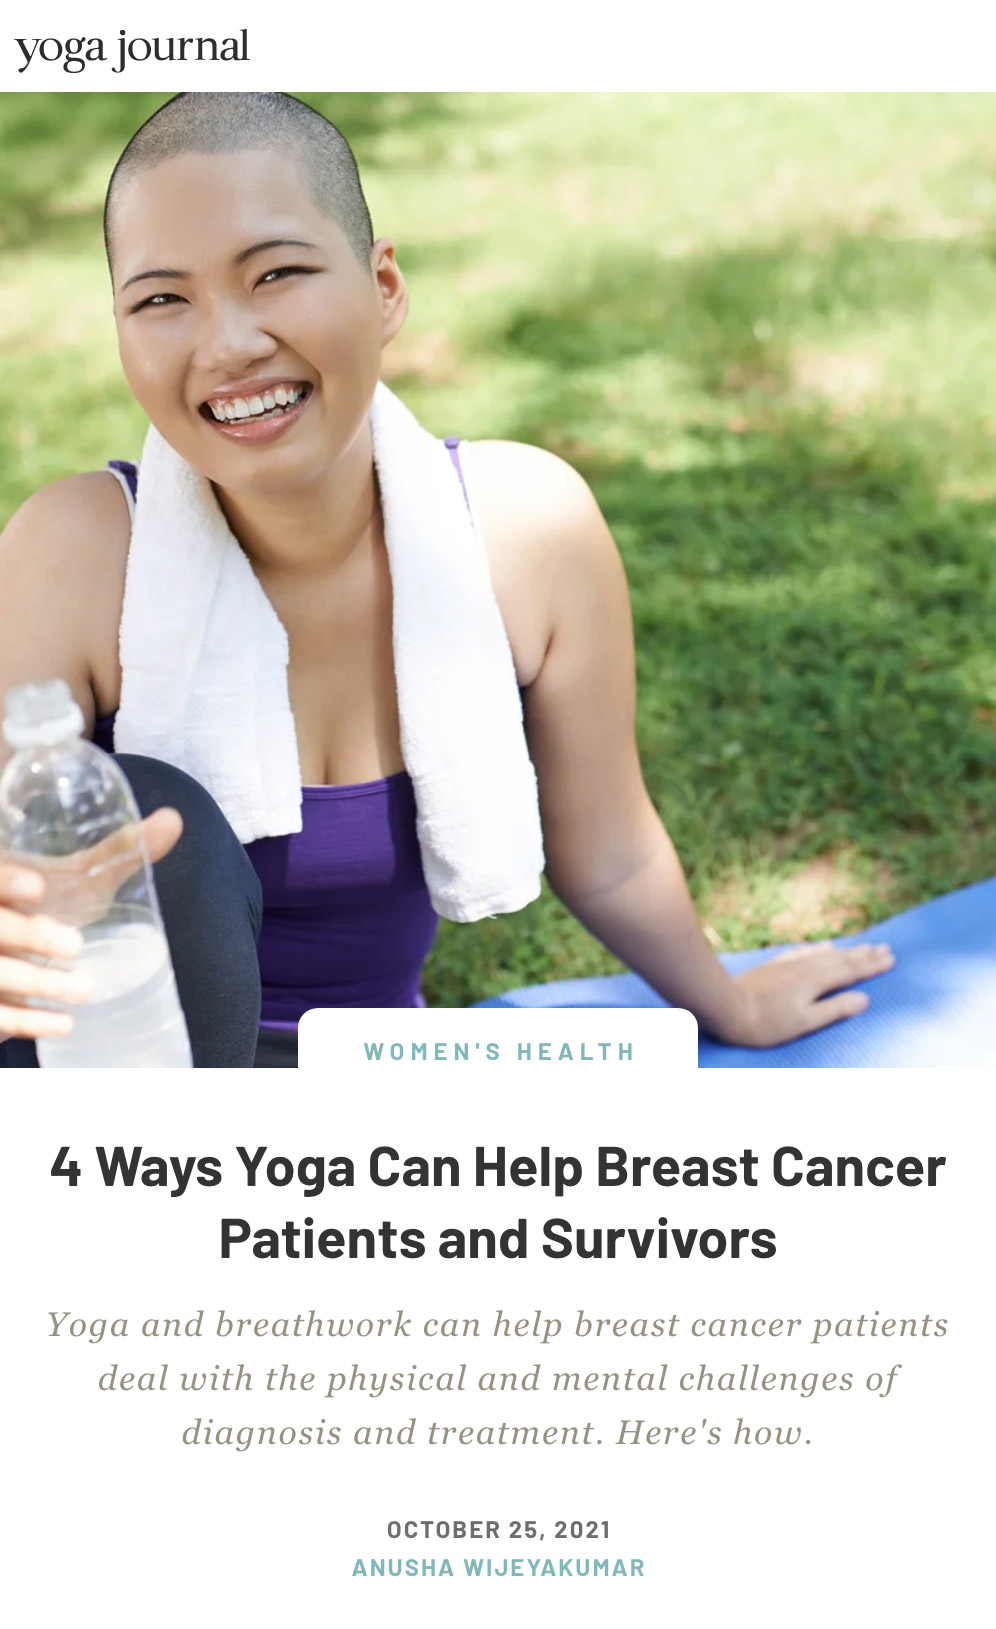 4 Ways Yoga Can Help Breast Cancer Patients and Survivors